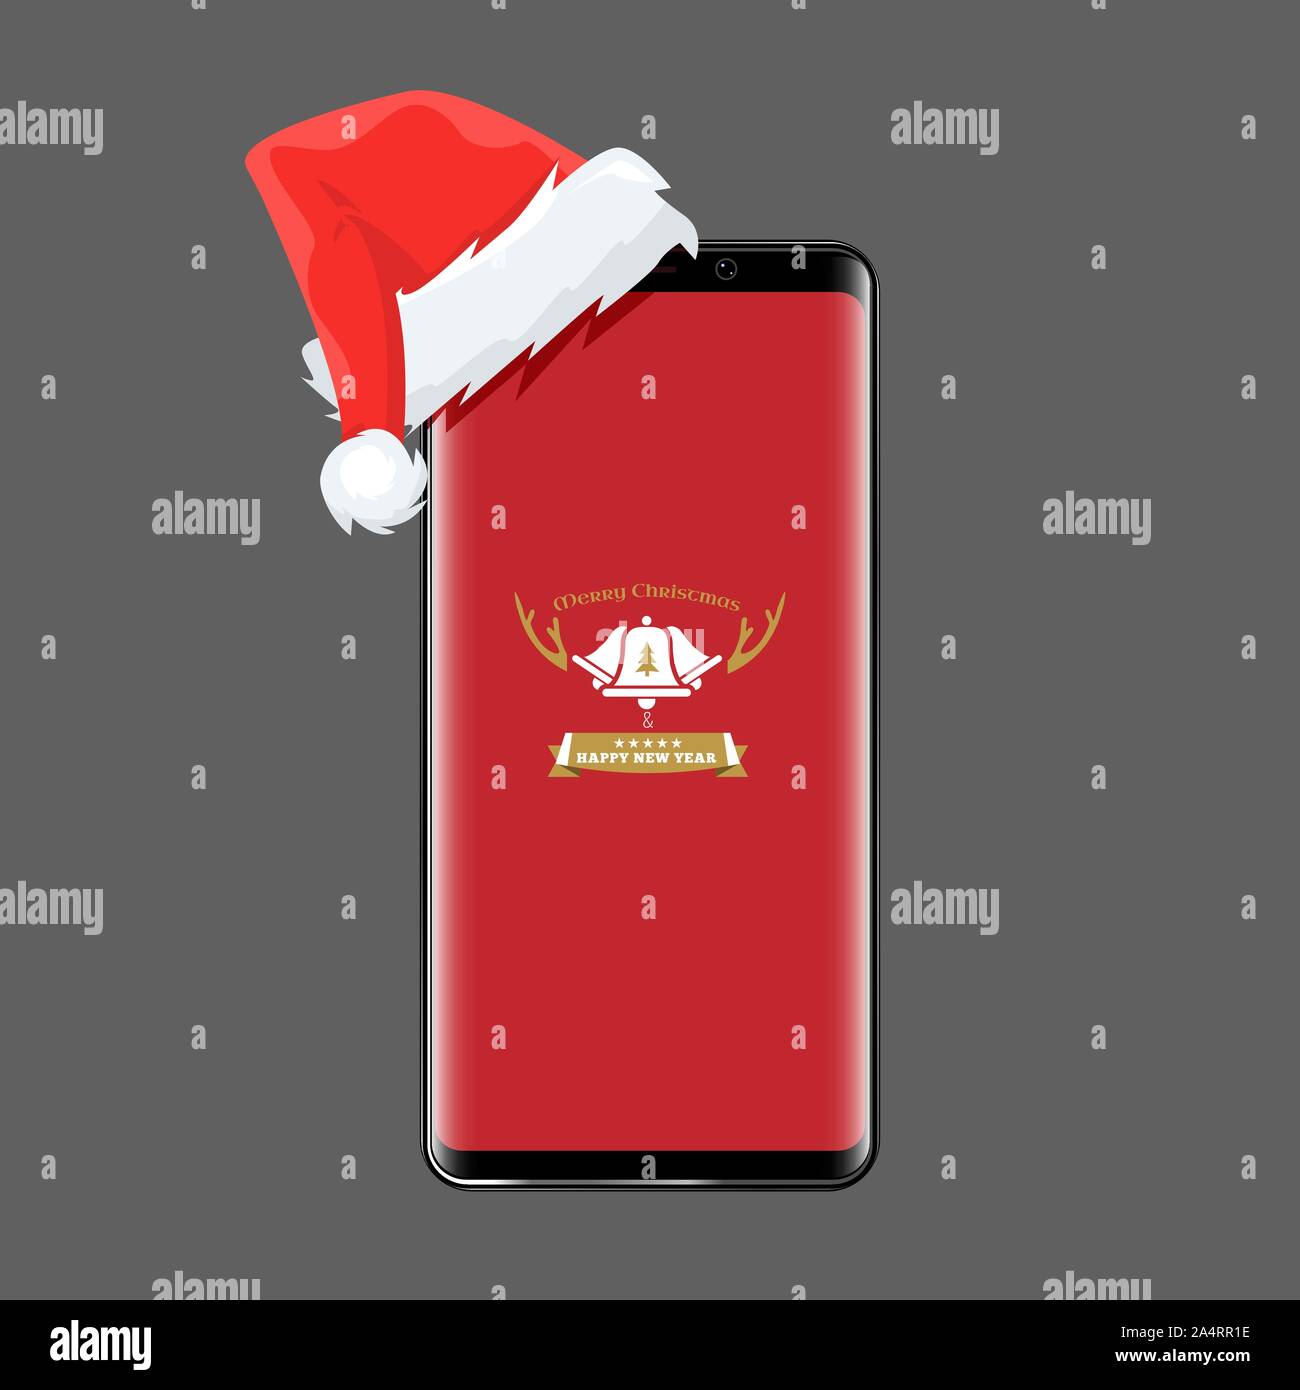 Smartphone with santa claus cap on it for christmas online shopping sale concept. Cell phone and new year design. Vector illustration. Stock Vector